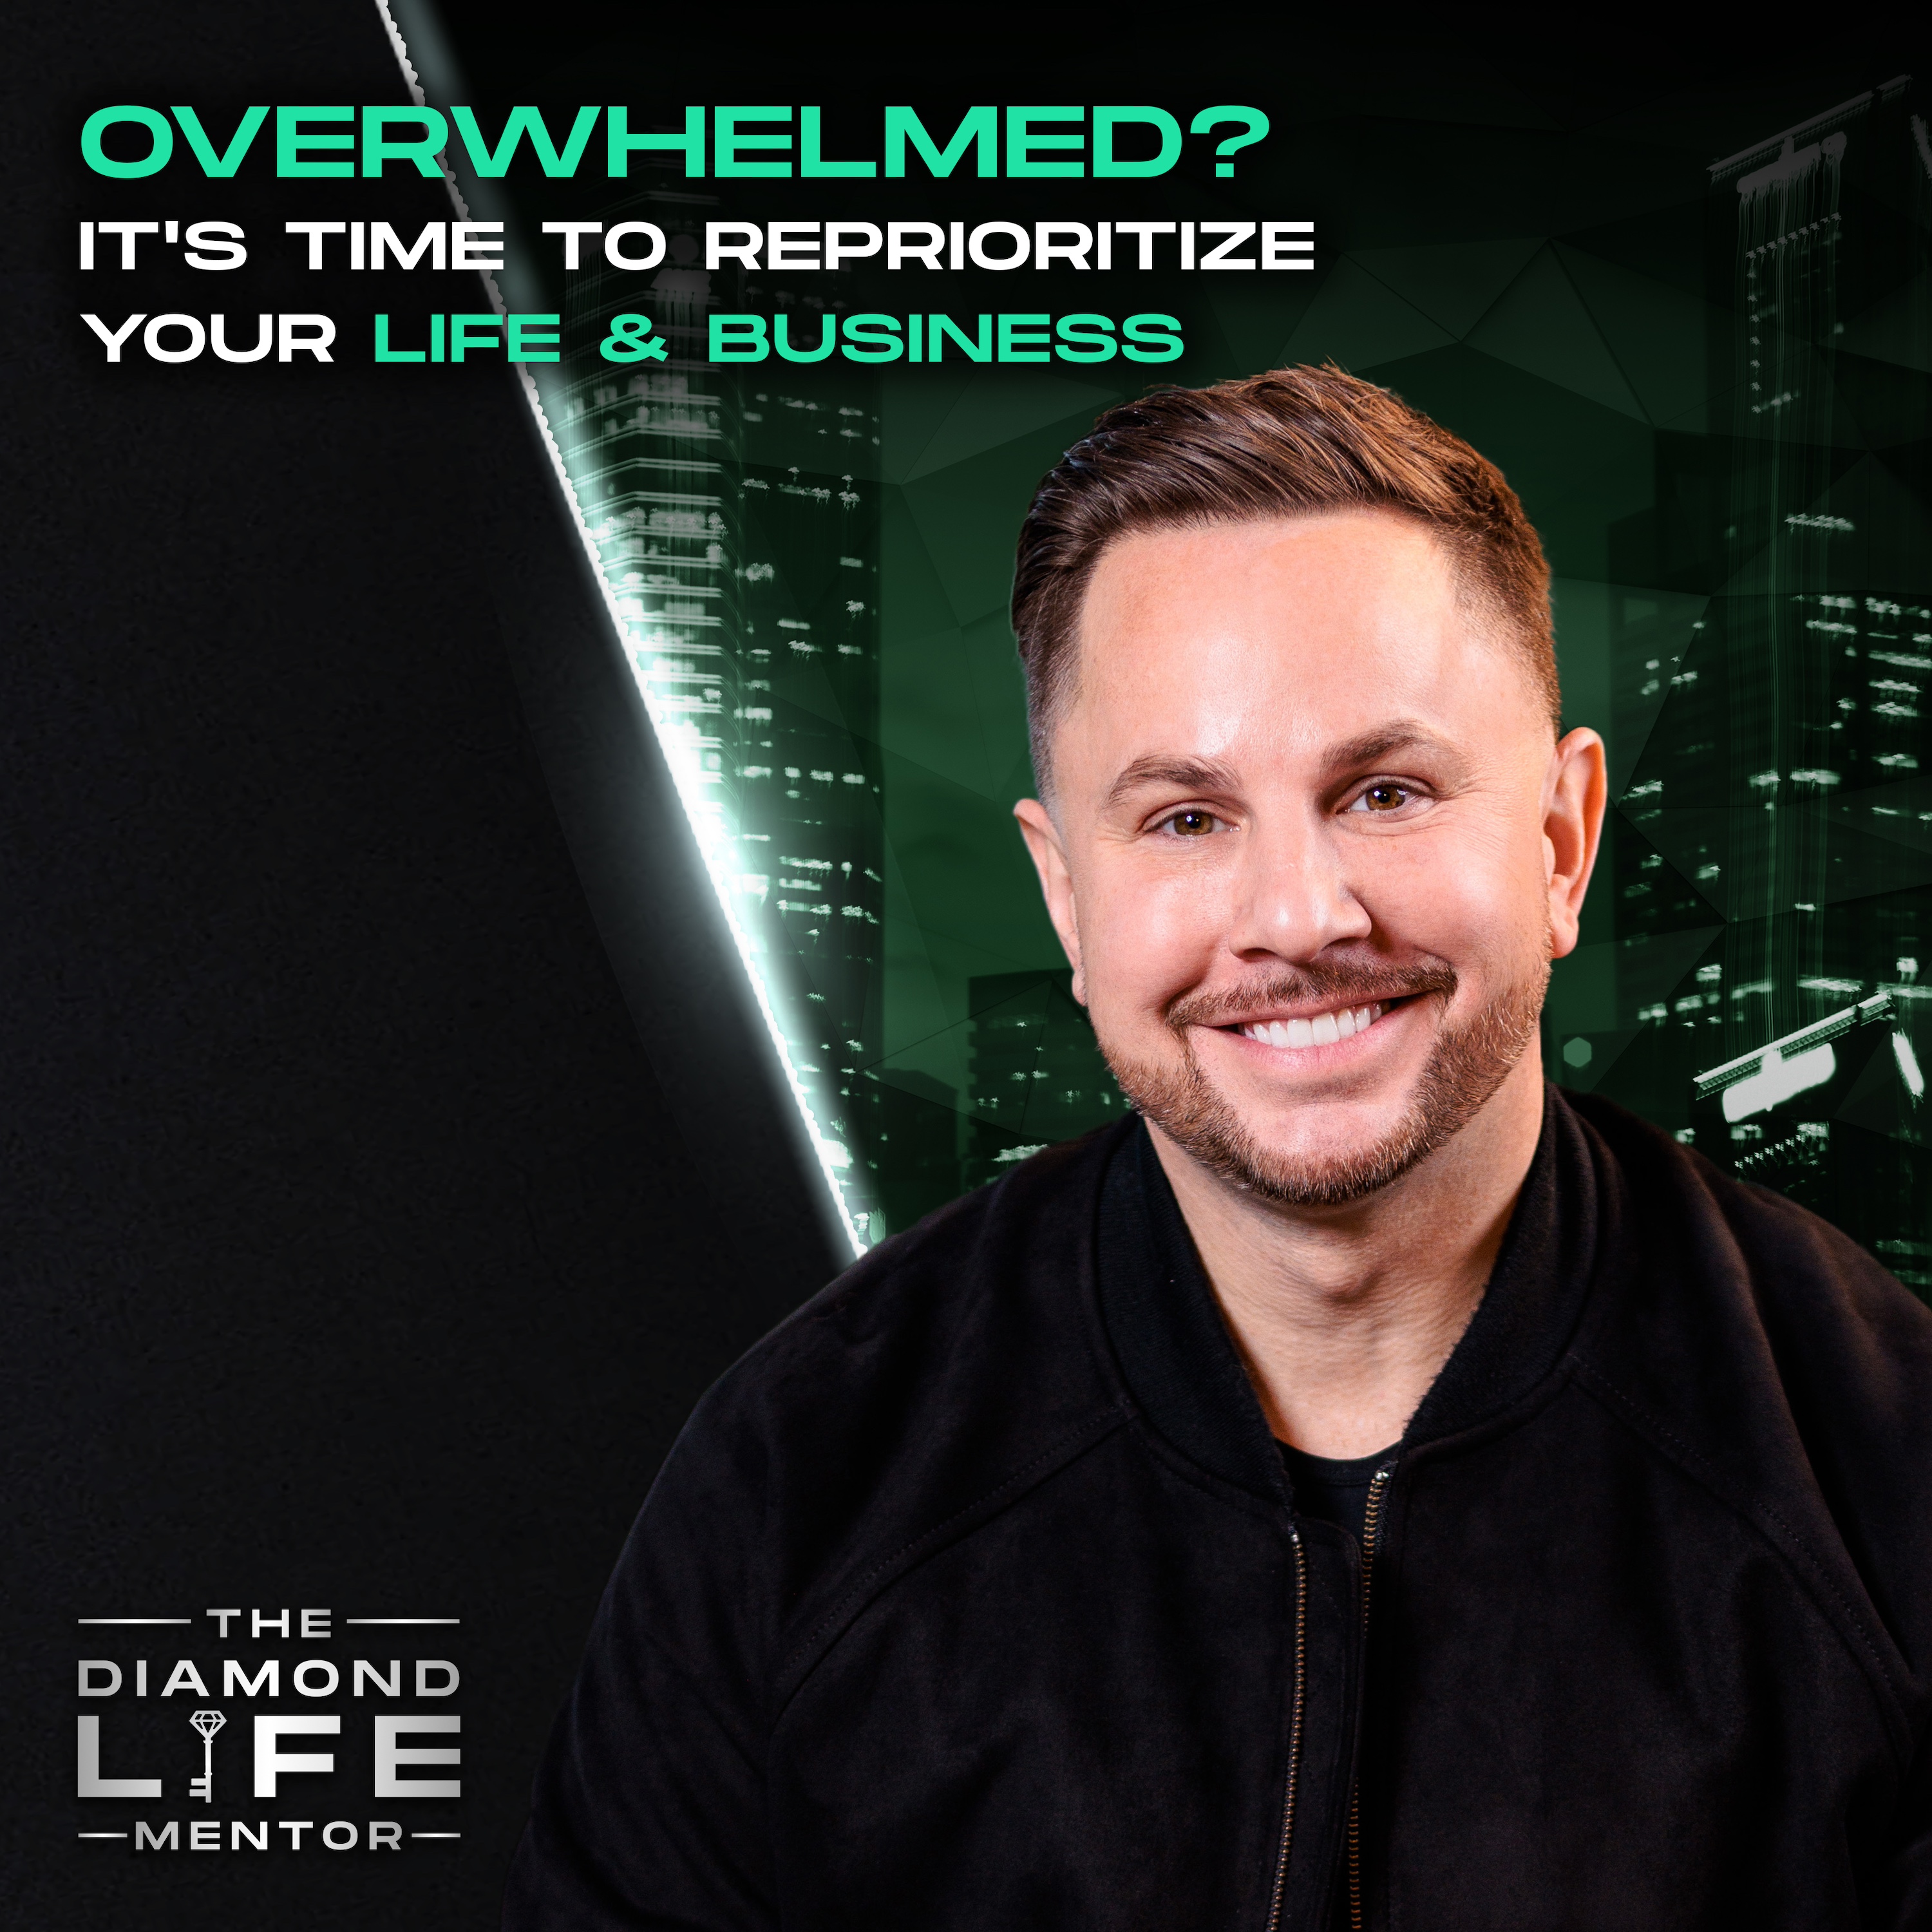 Overwhelmed? It’s Time to Reprioritize Your Life & Business